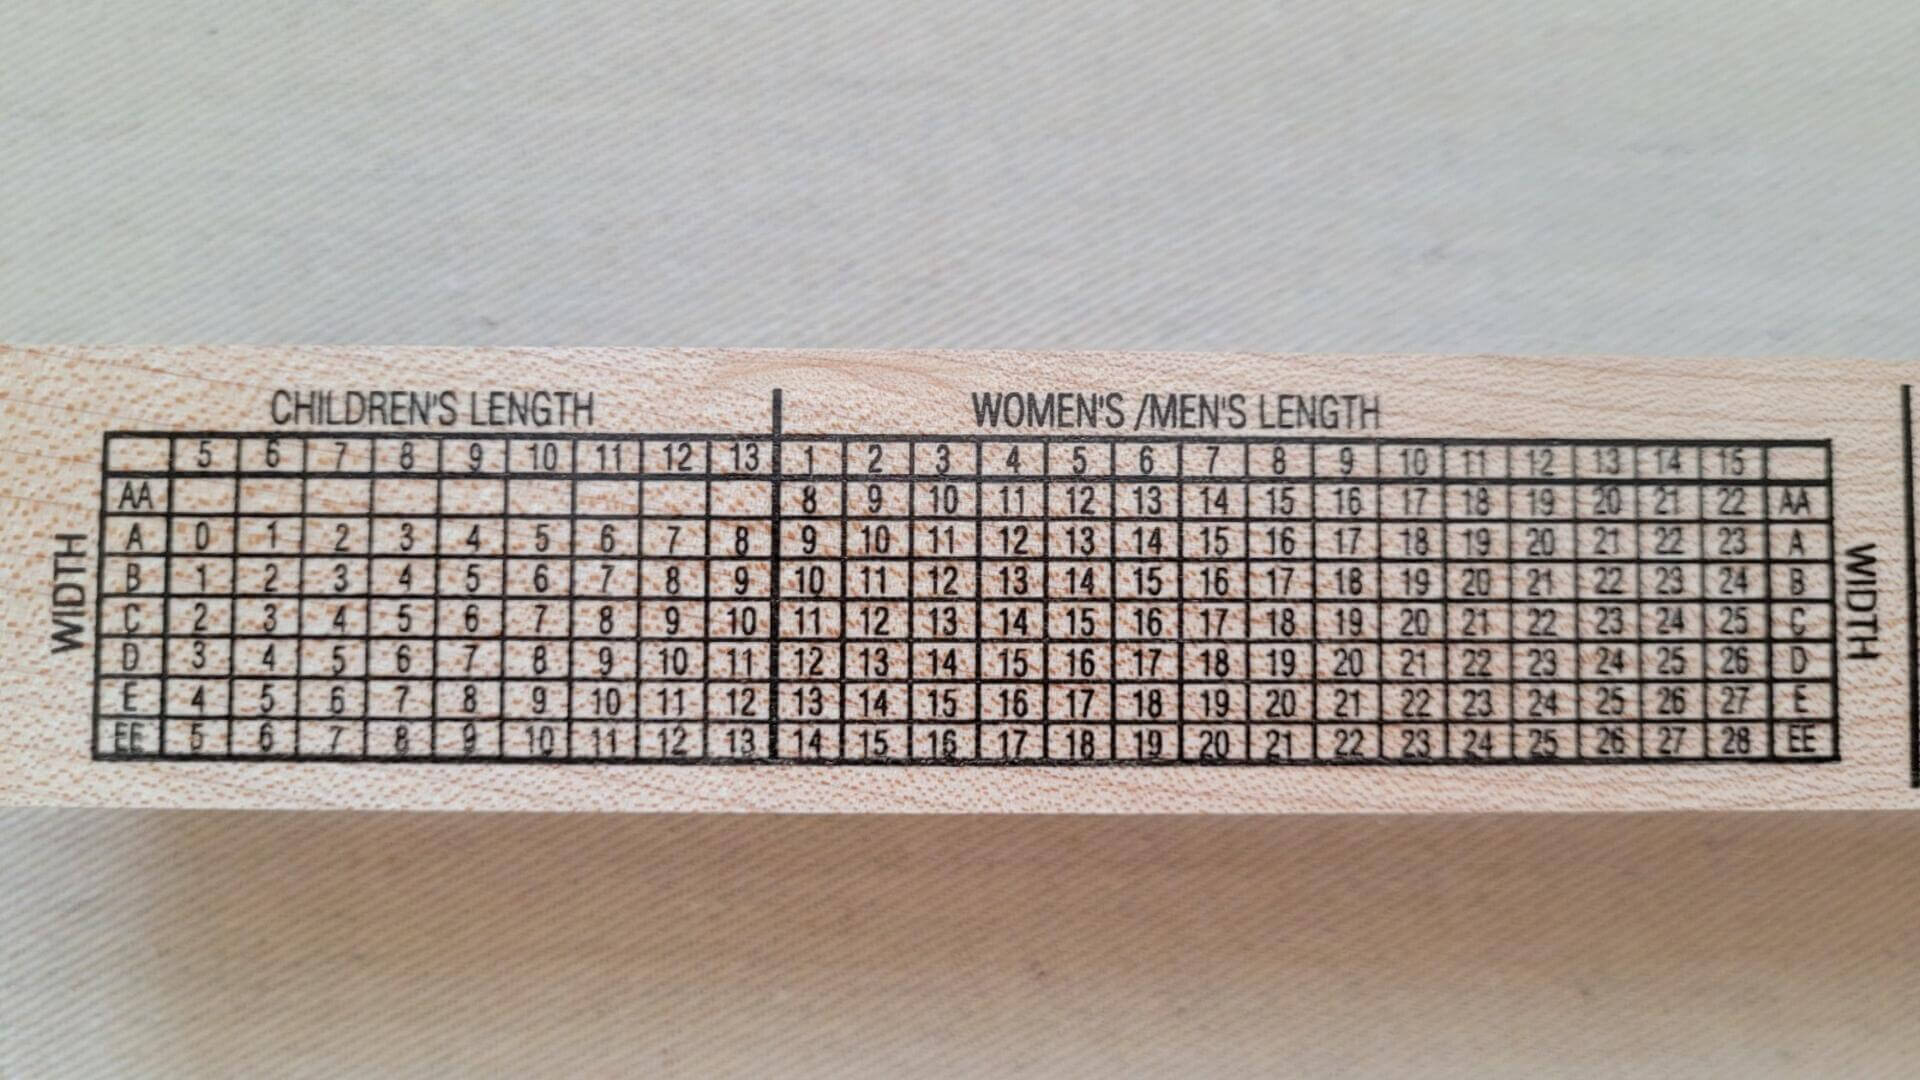 Beautiful and rare premium wood Mondor foot sizer ruler used to measure feet length and width. This is made in USA Brannock device, a single tool that quickly sizes women's, men's and children's feet using sliding measuring lever.